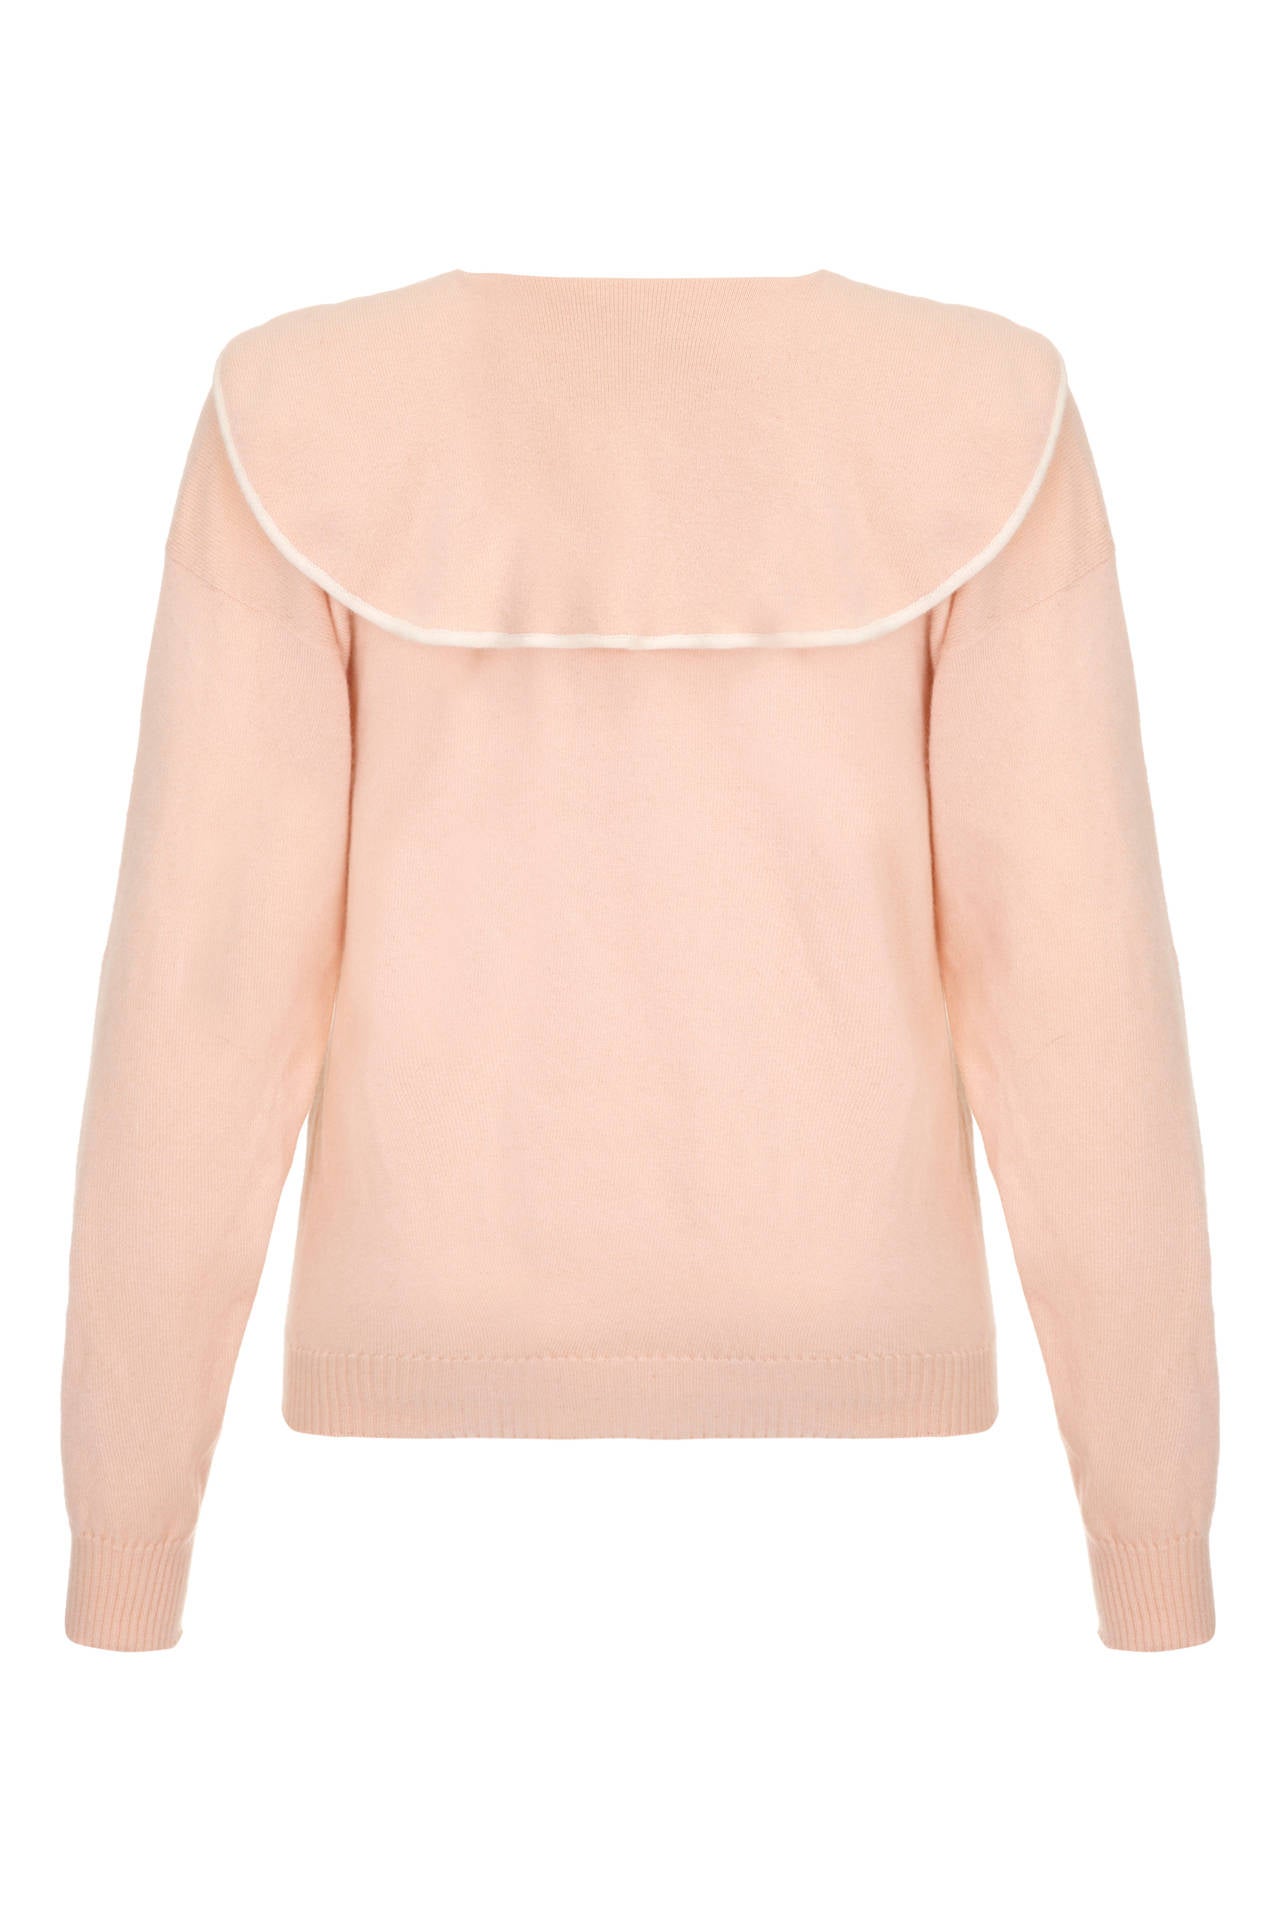 Super cute and unused 100% cashmere jumper in peachy pink with sailor collar and navy and white details include a bow at the centre front. Made in Scotland, very wearable and in excellent condition.